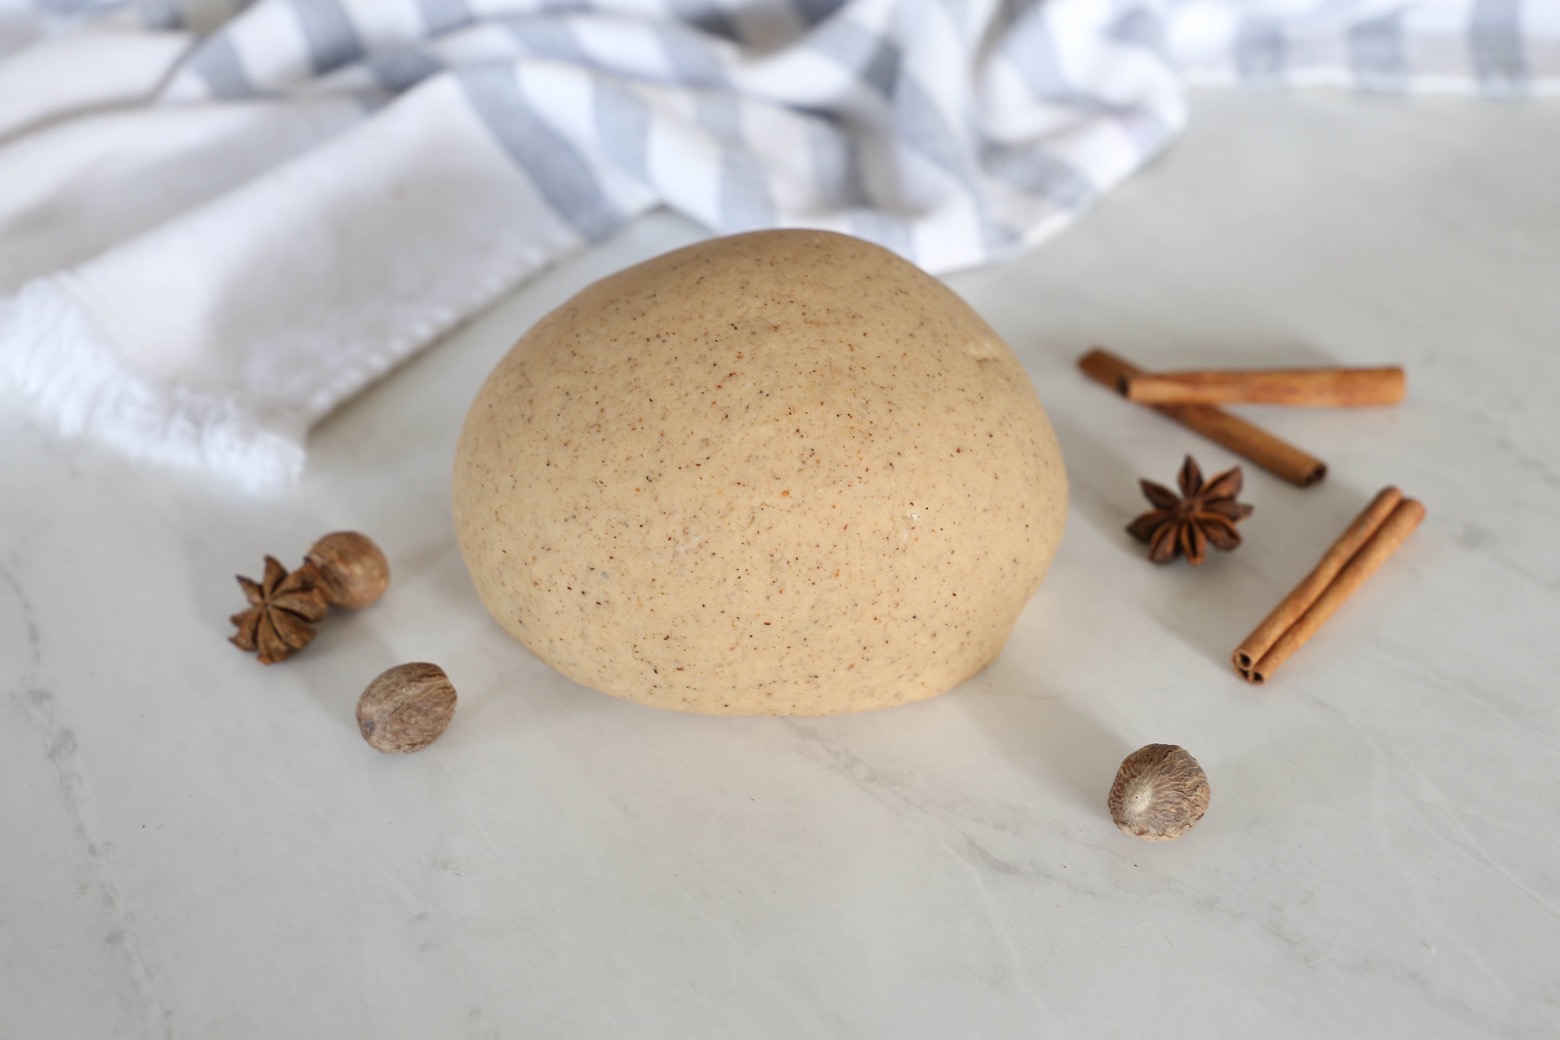 Autumn Spice Play Dough with Whole Spices